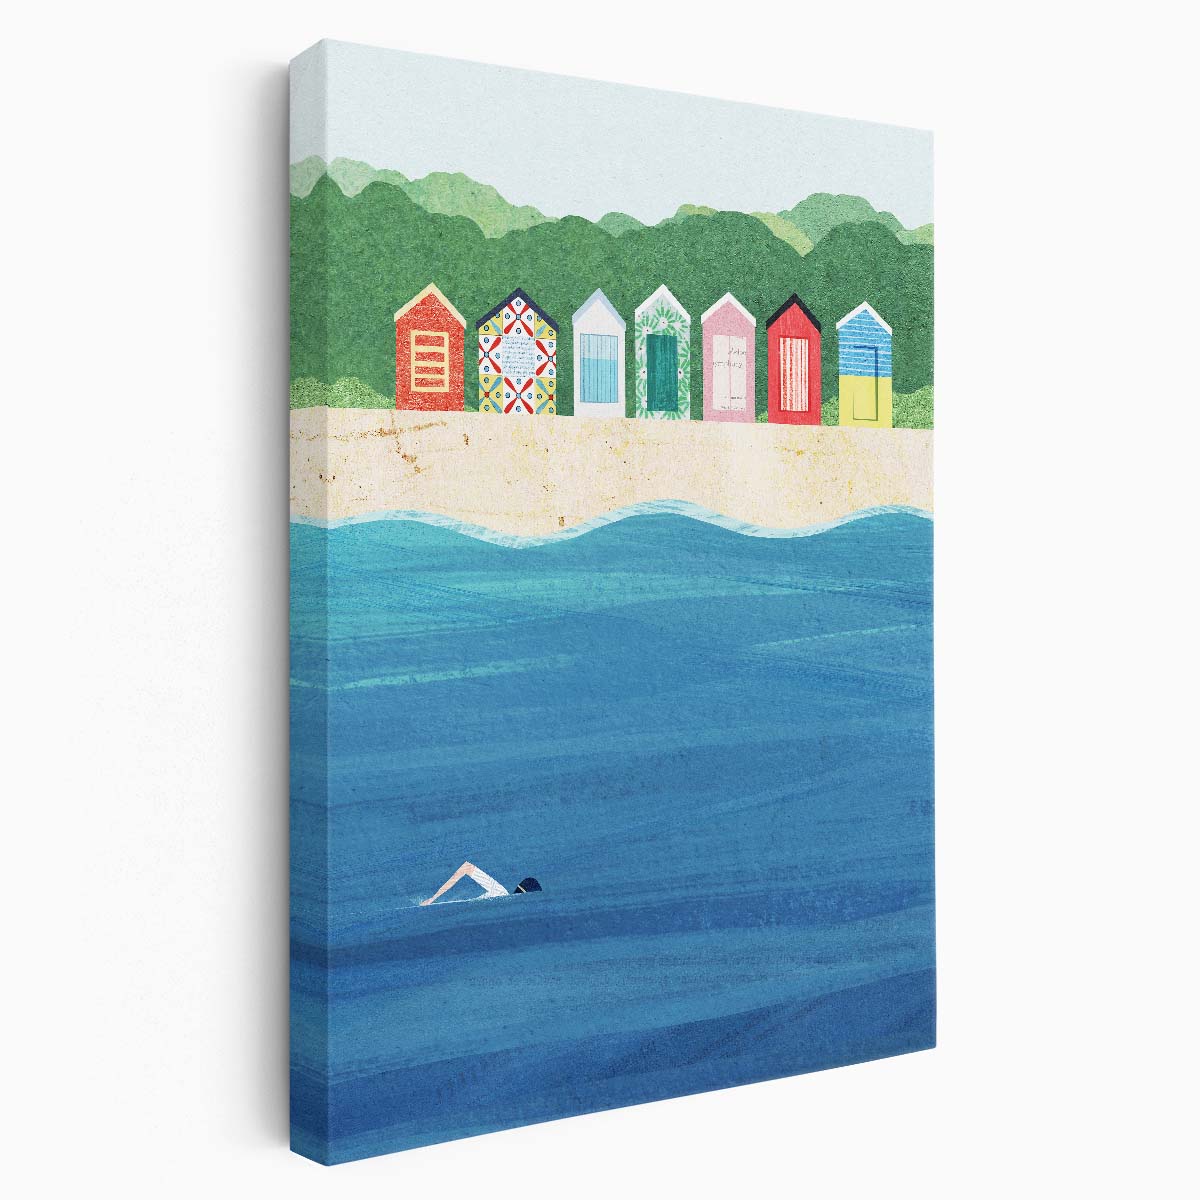 Colorful Brighton Beach Huts Illustration Art, Melbourne Australia by Luxuriance Designs, made in USA